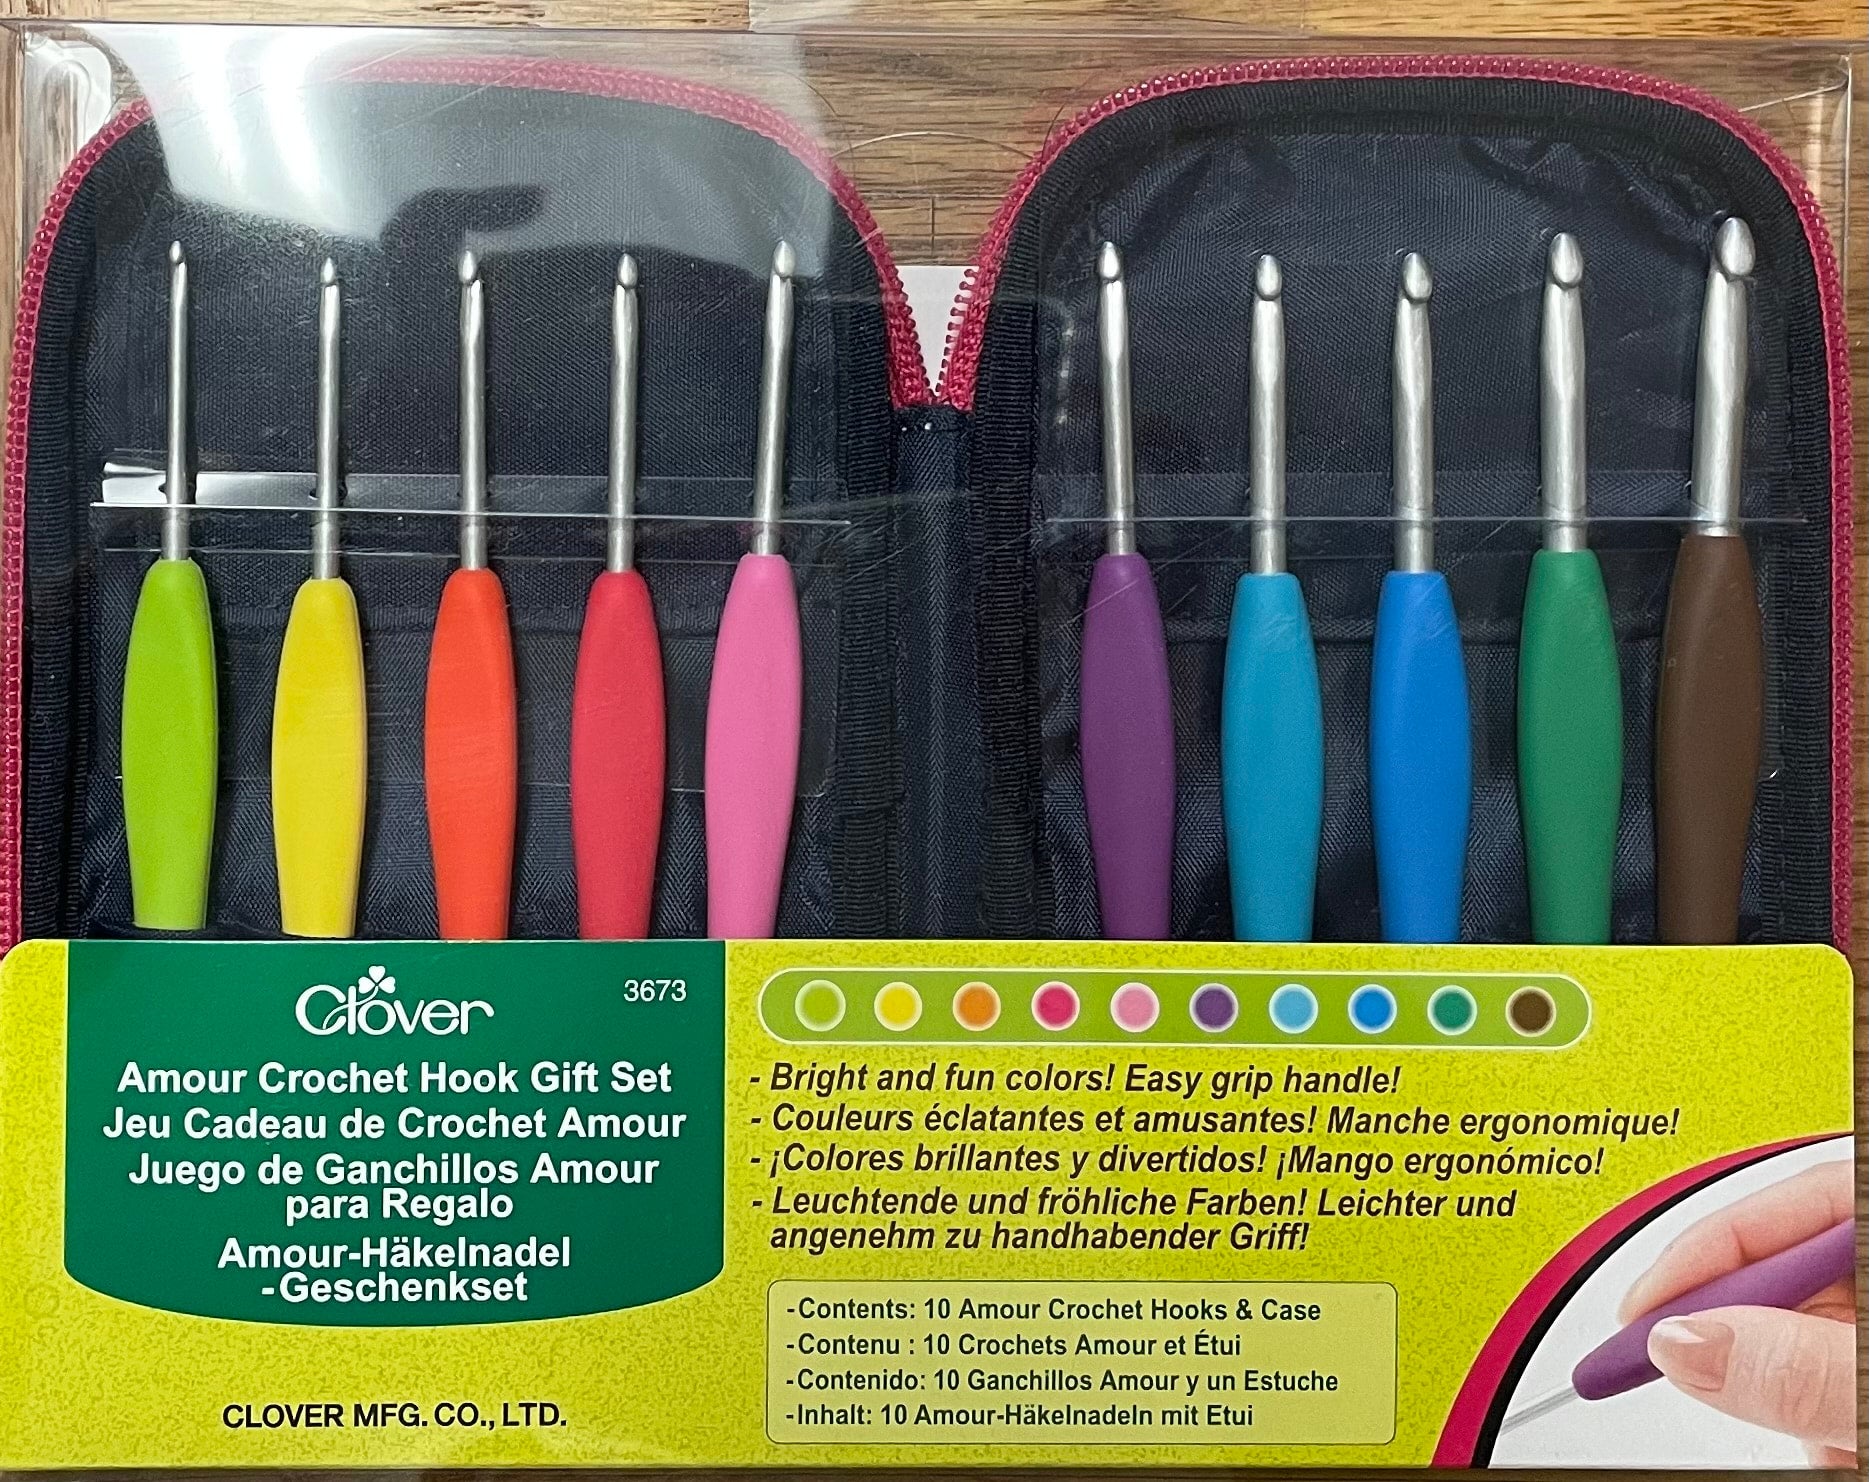 Amour Crochet Hook Gift Set with Case